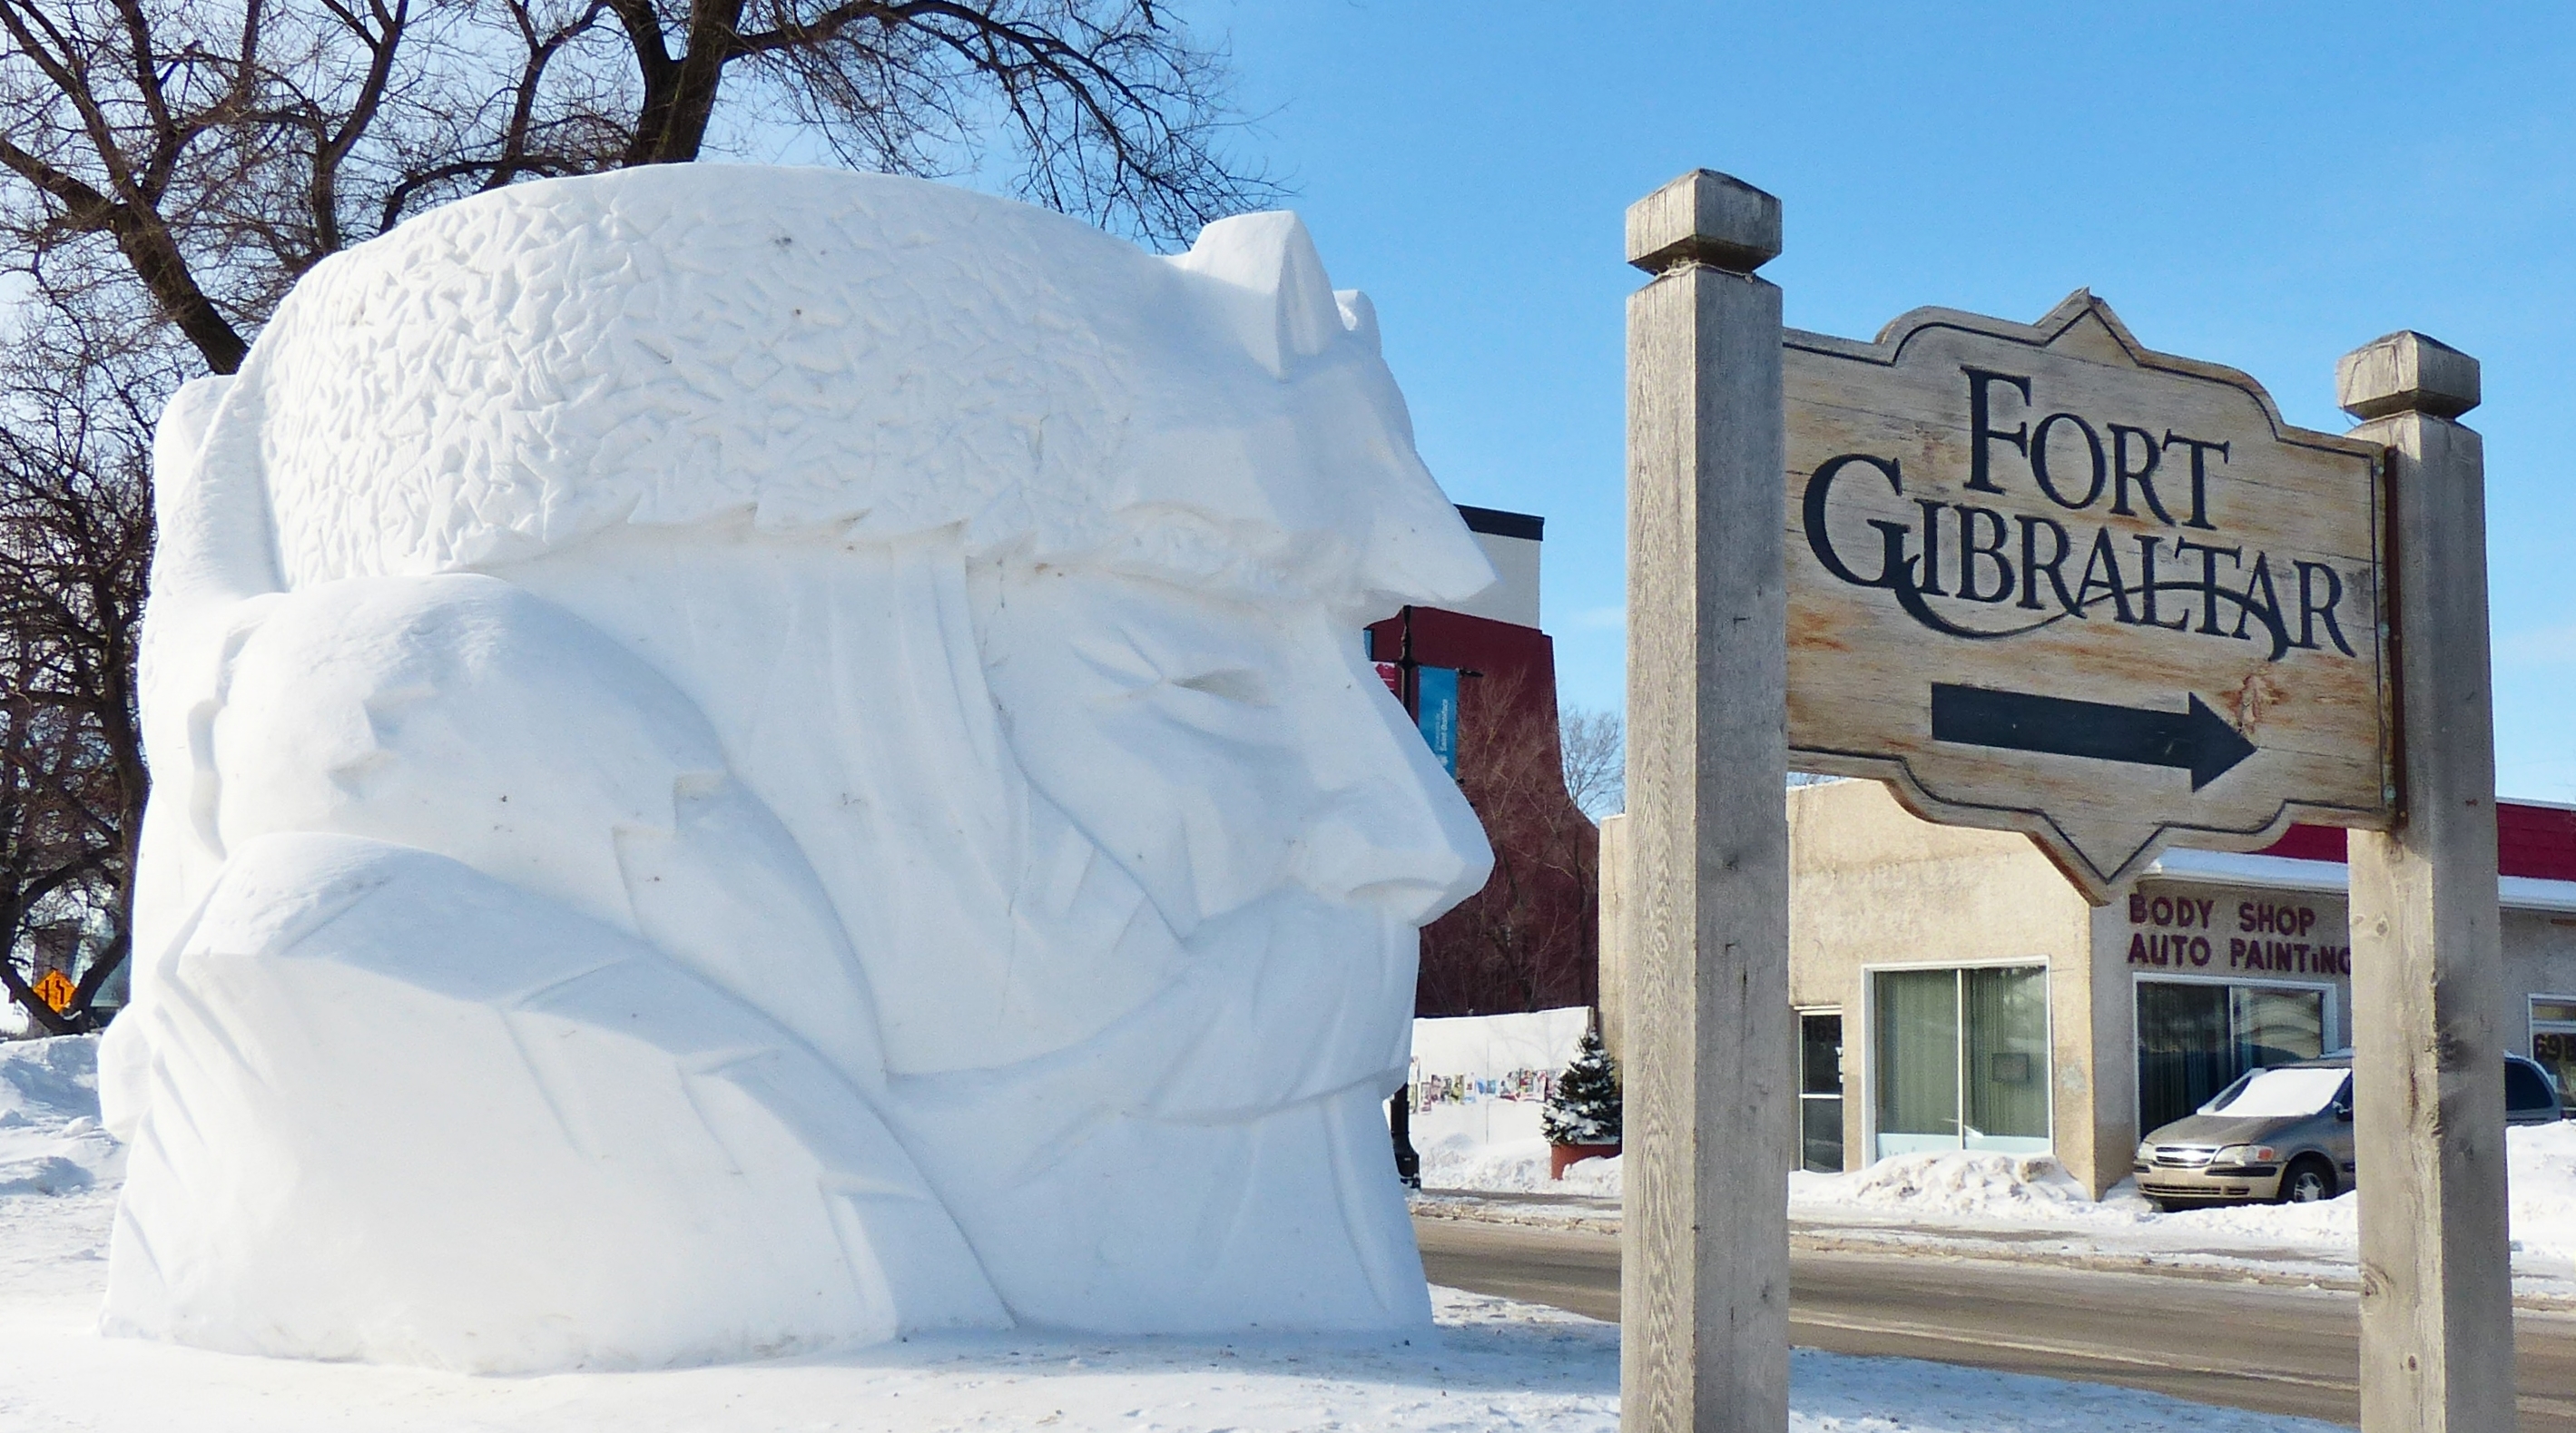 Photo of the a snow sculpture at the entrance to Fort Gibraltor for the Festival due Voyageur.